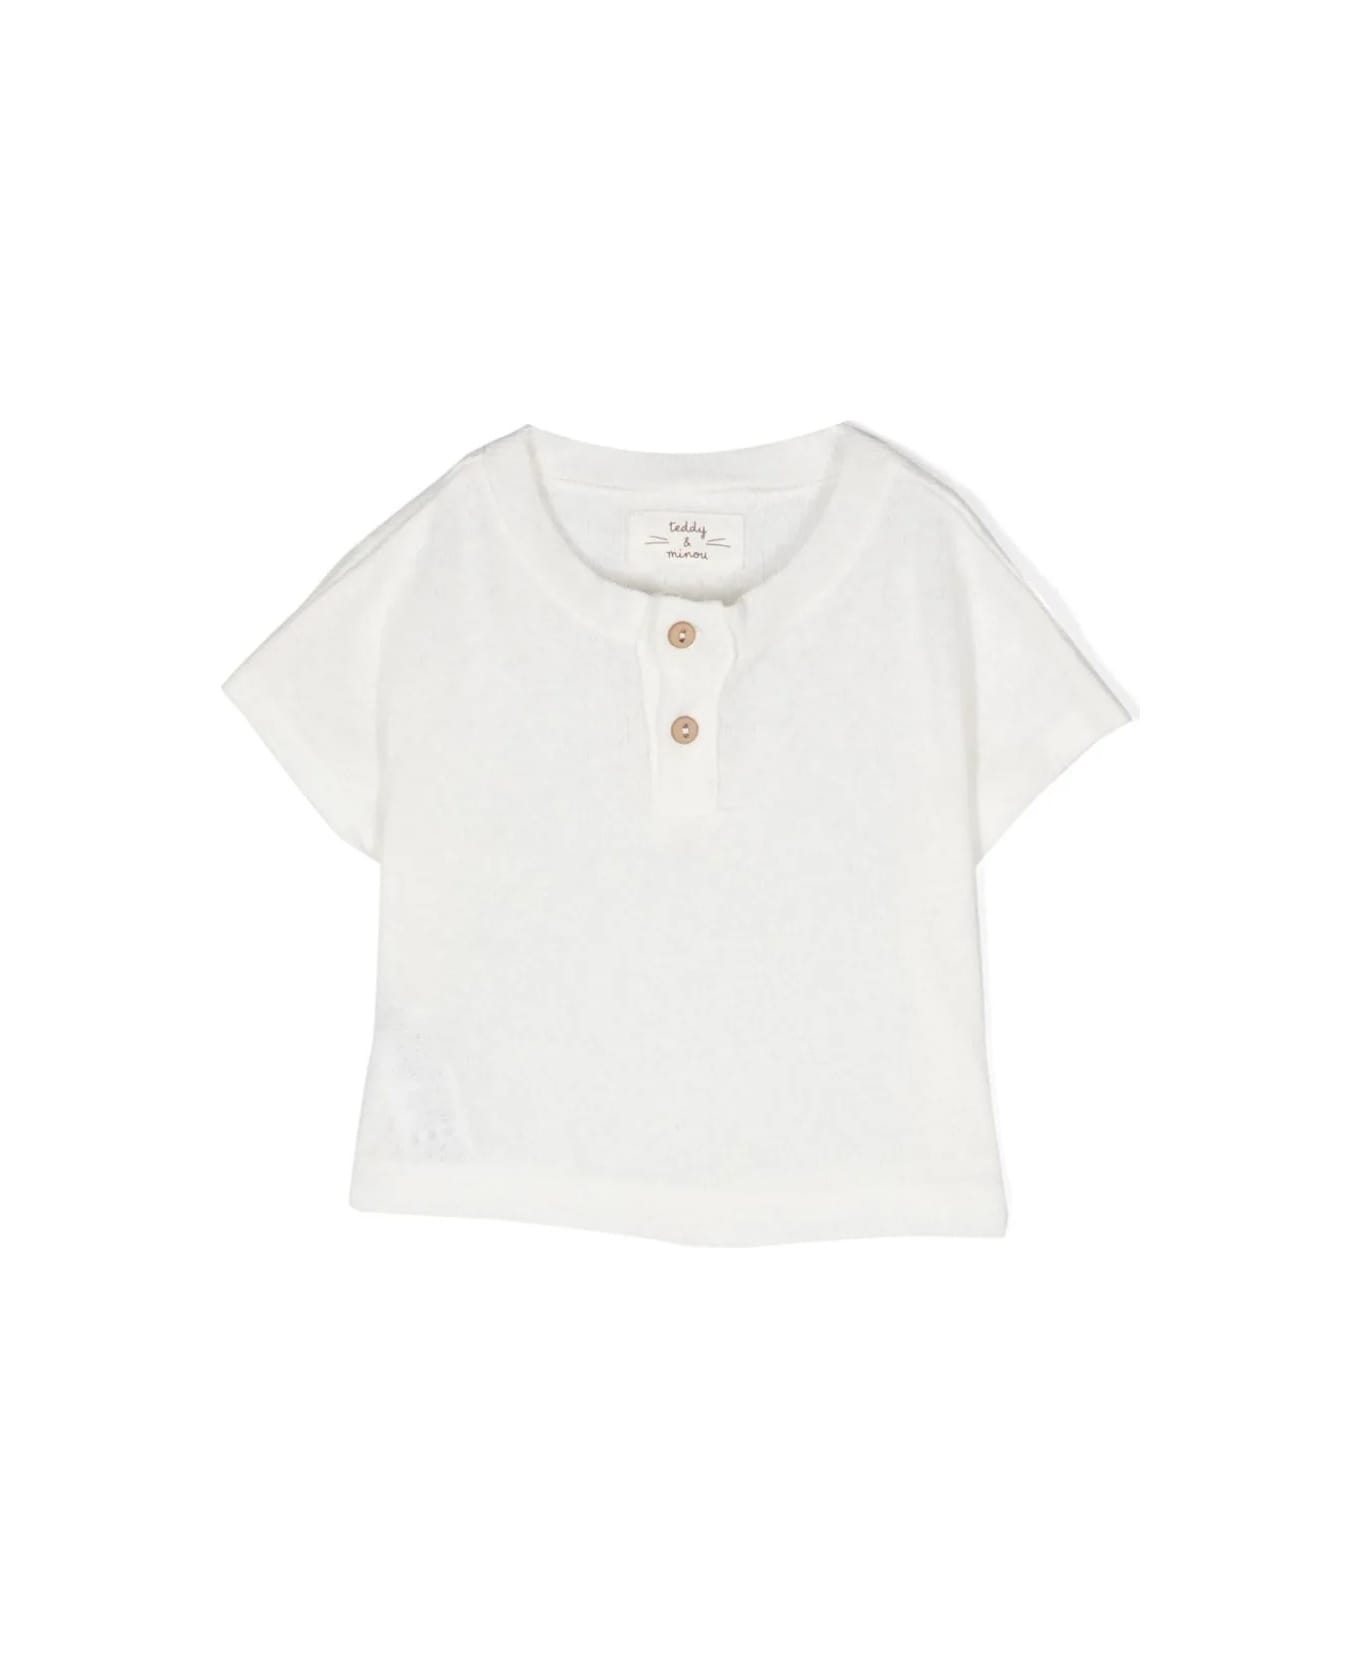 Teddy & Minou White T-shirt With Buttons - White